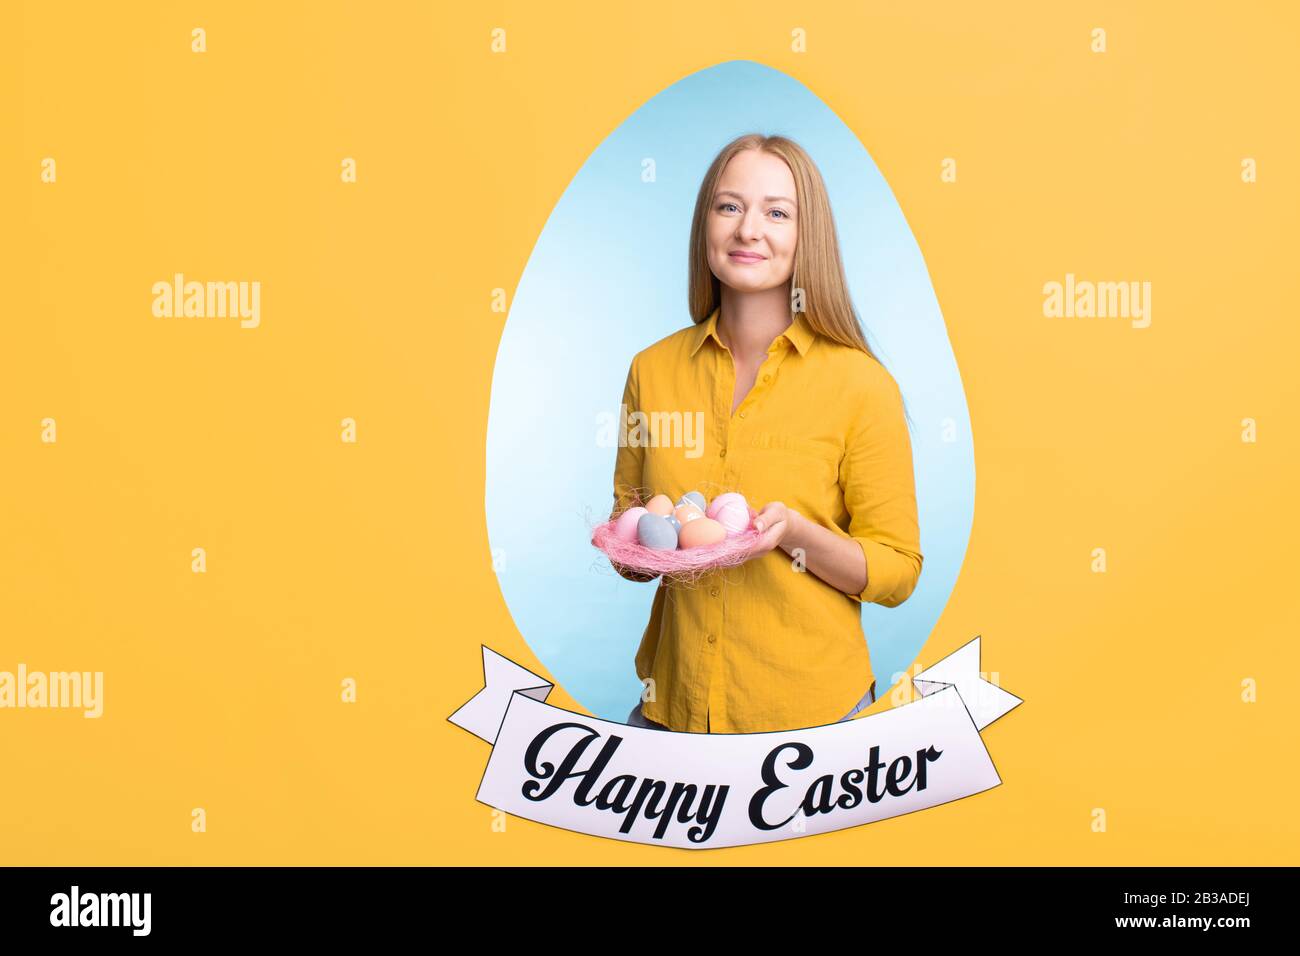 Portrait of smiling young blond-haired woman posing with Easter eggs in egg-shaped frame Stock Photo